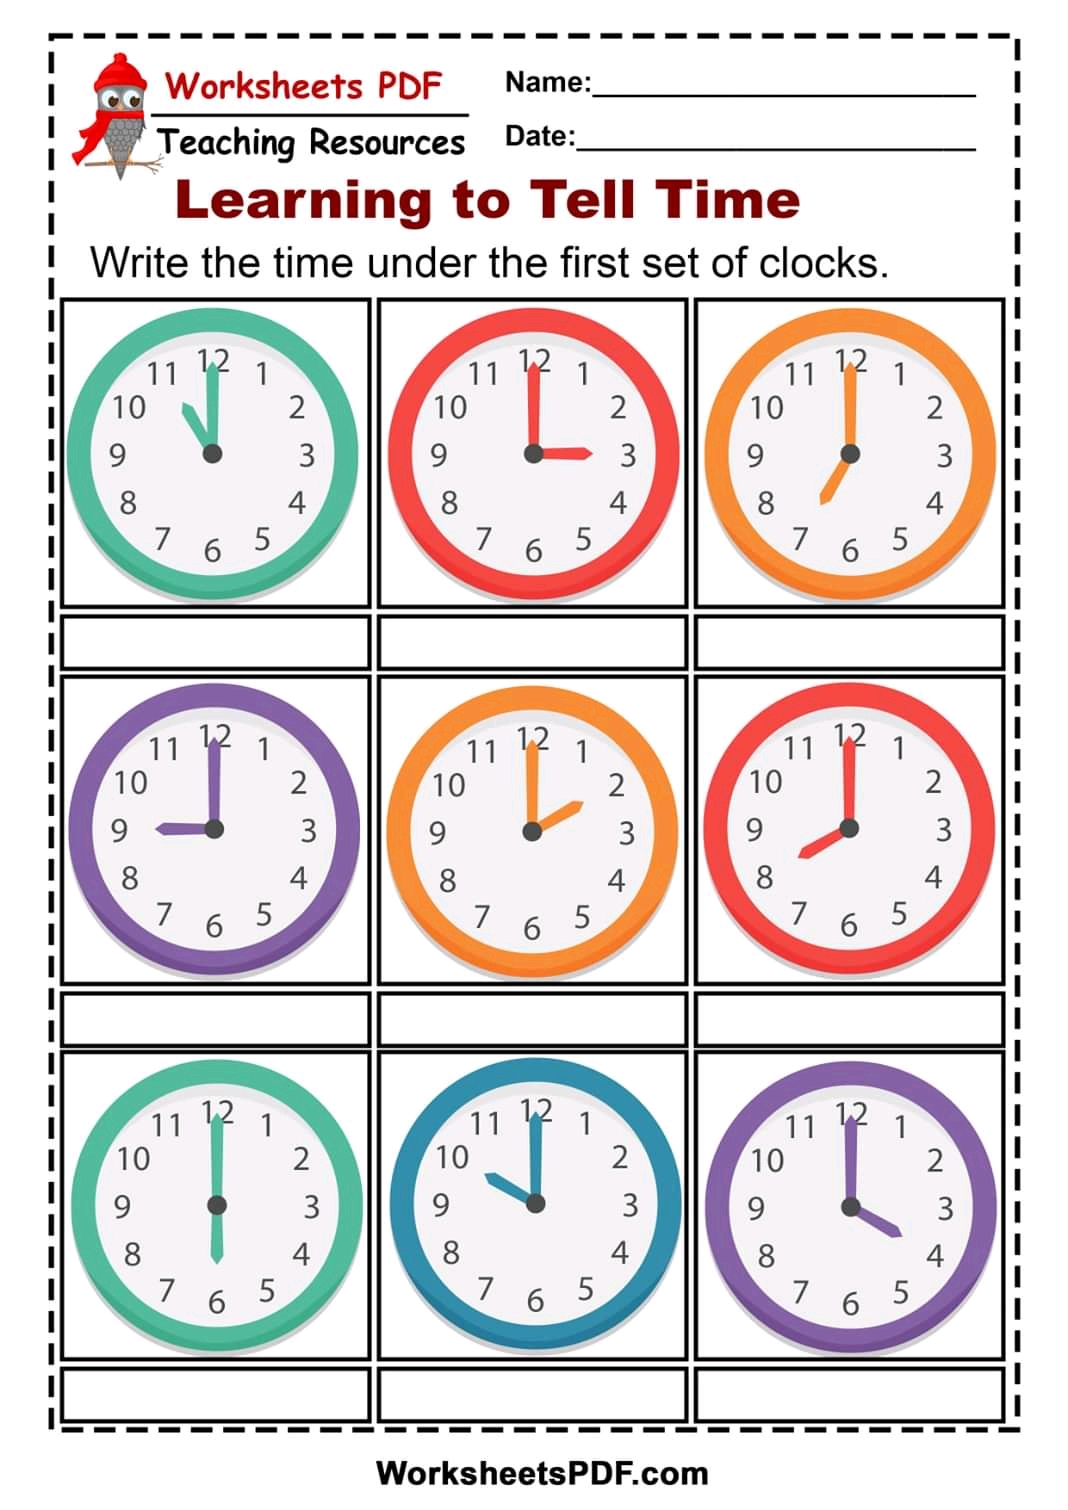 Free Printable Worksheet On Telling Time To The Hour